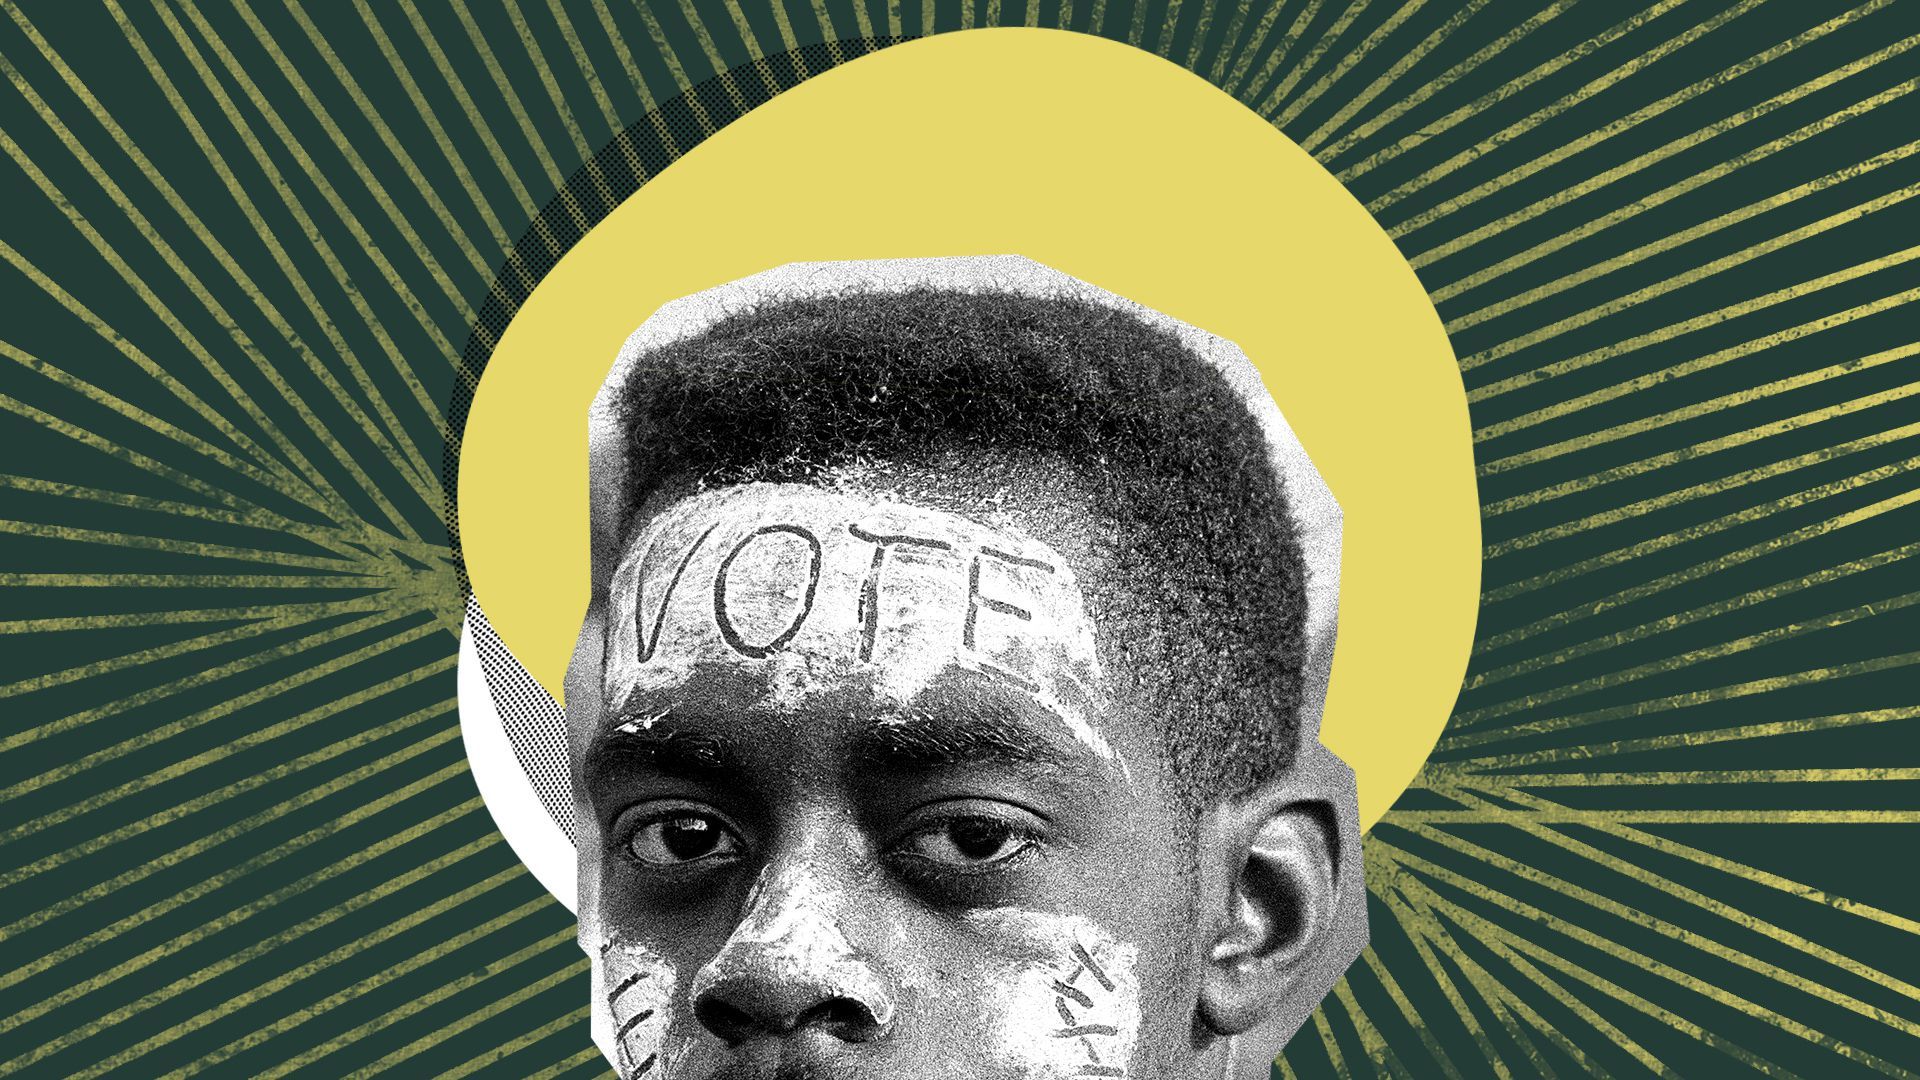 Photo illustration of a young Black man with the word "VOTE" painted on his forehead. 